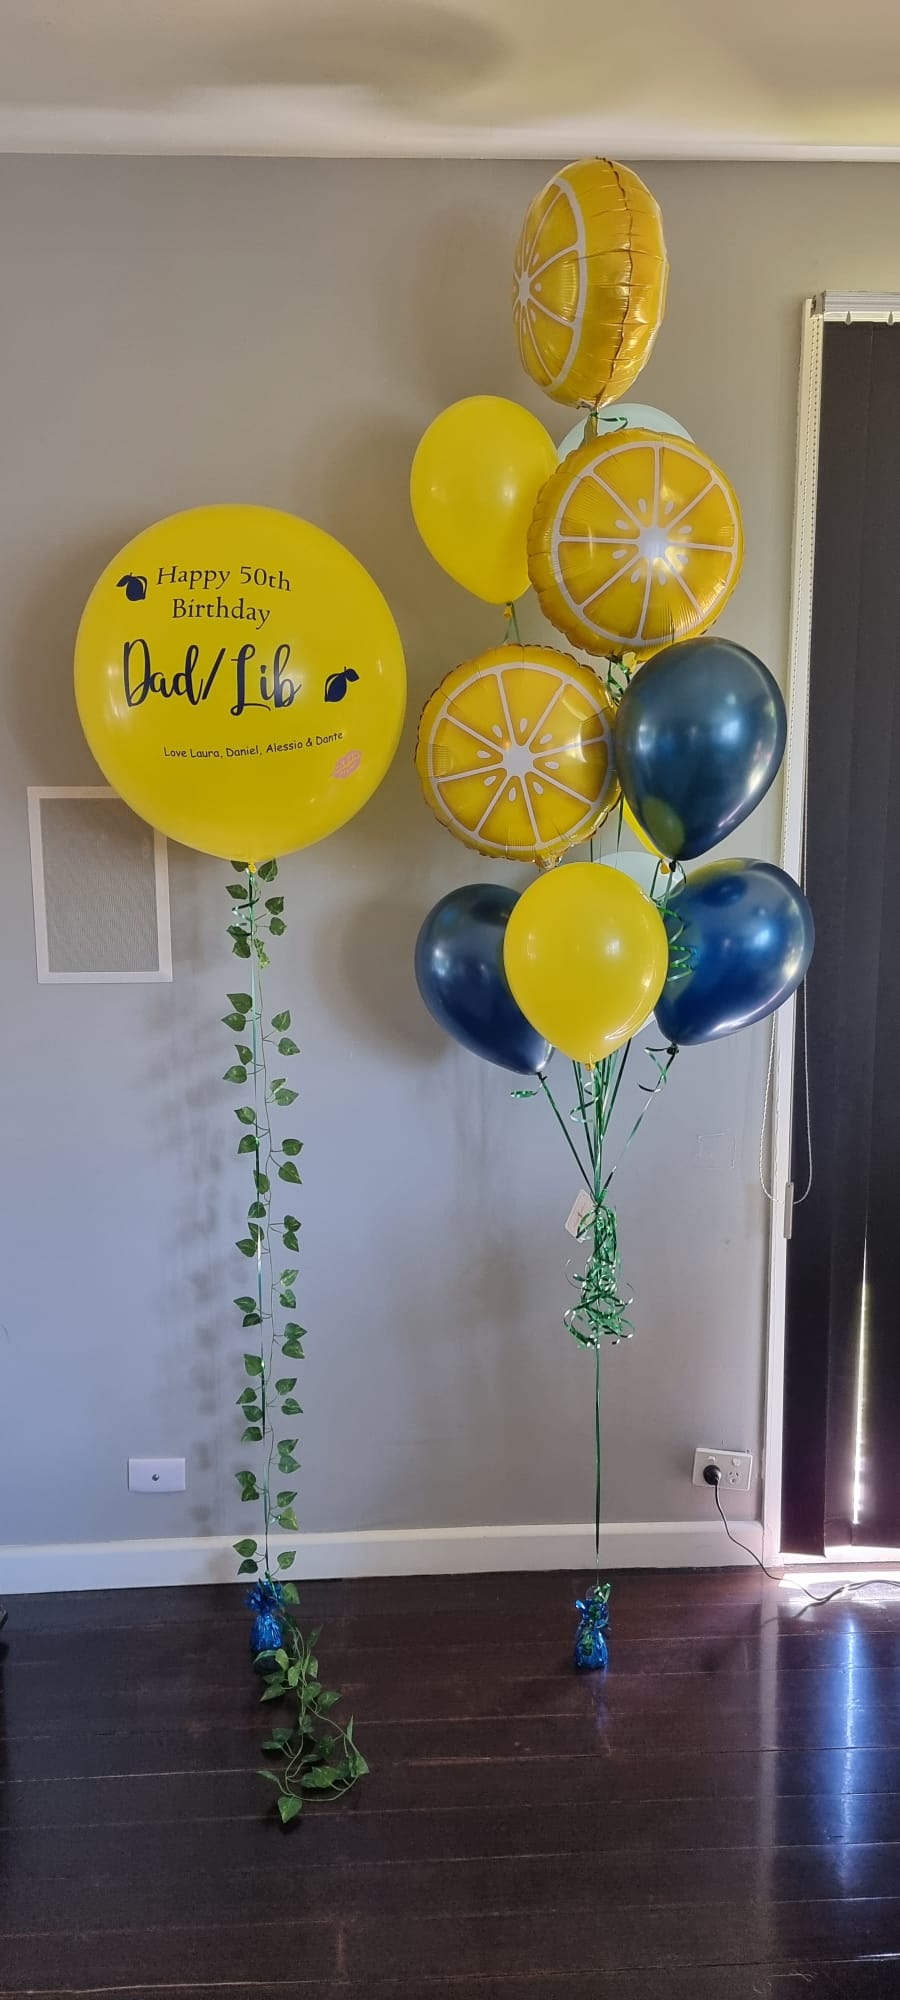 Amalfi coast themed balloon bouquet Melbourne delivered 7 days